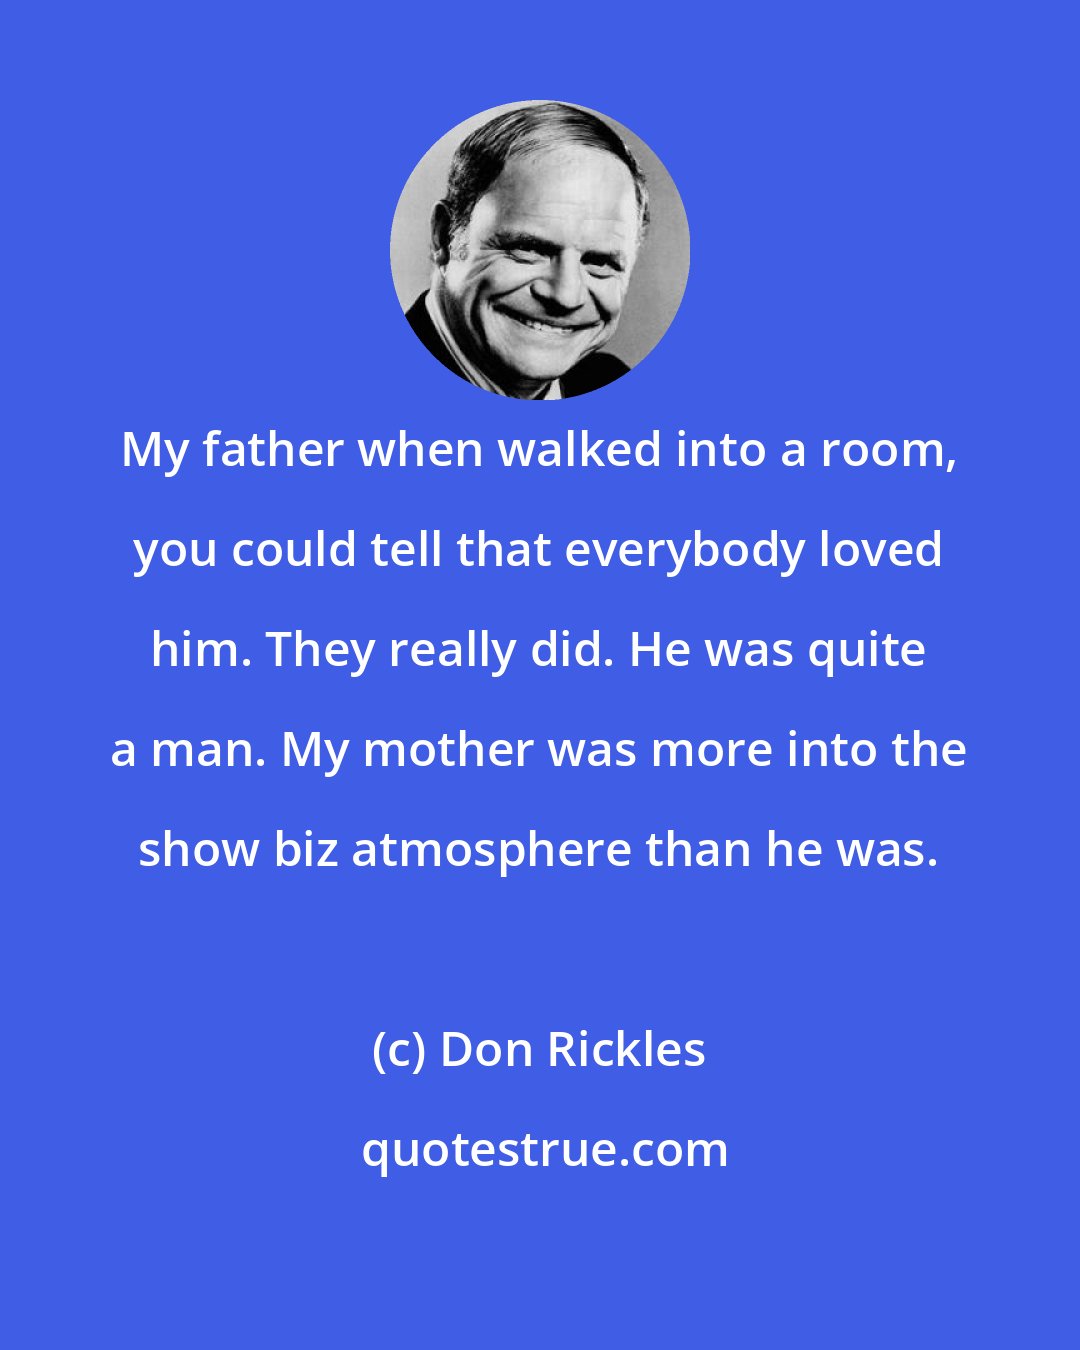 Don Rickles: My father when walked into a room, you could tell that everybody loved him. They really did. He was quite a man. My mother was more into the show biz atmosphere than he was.